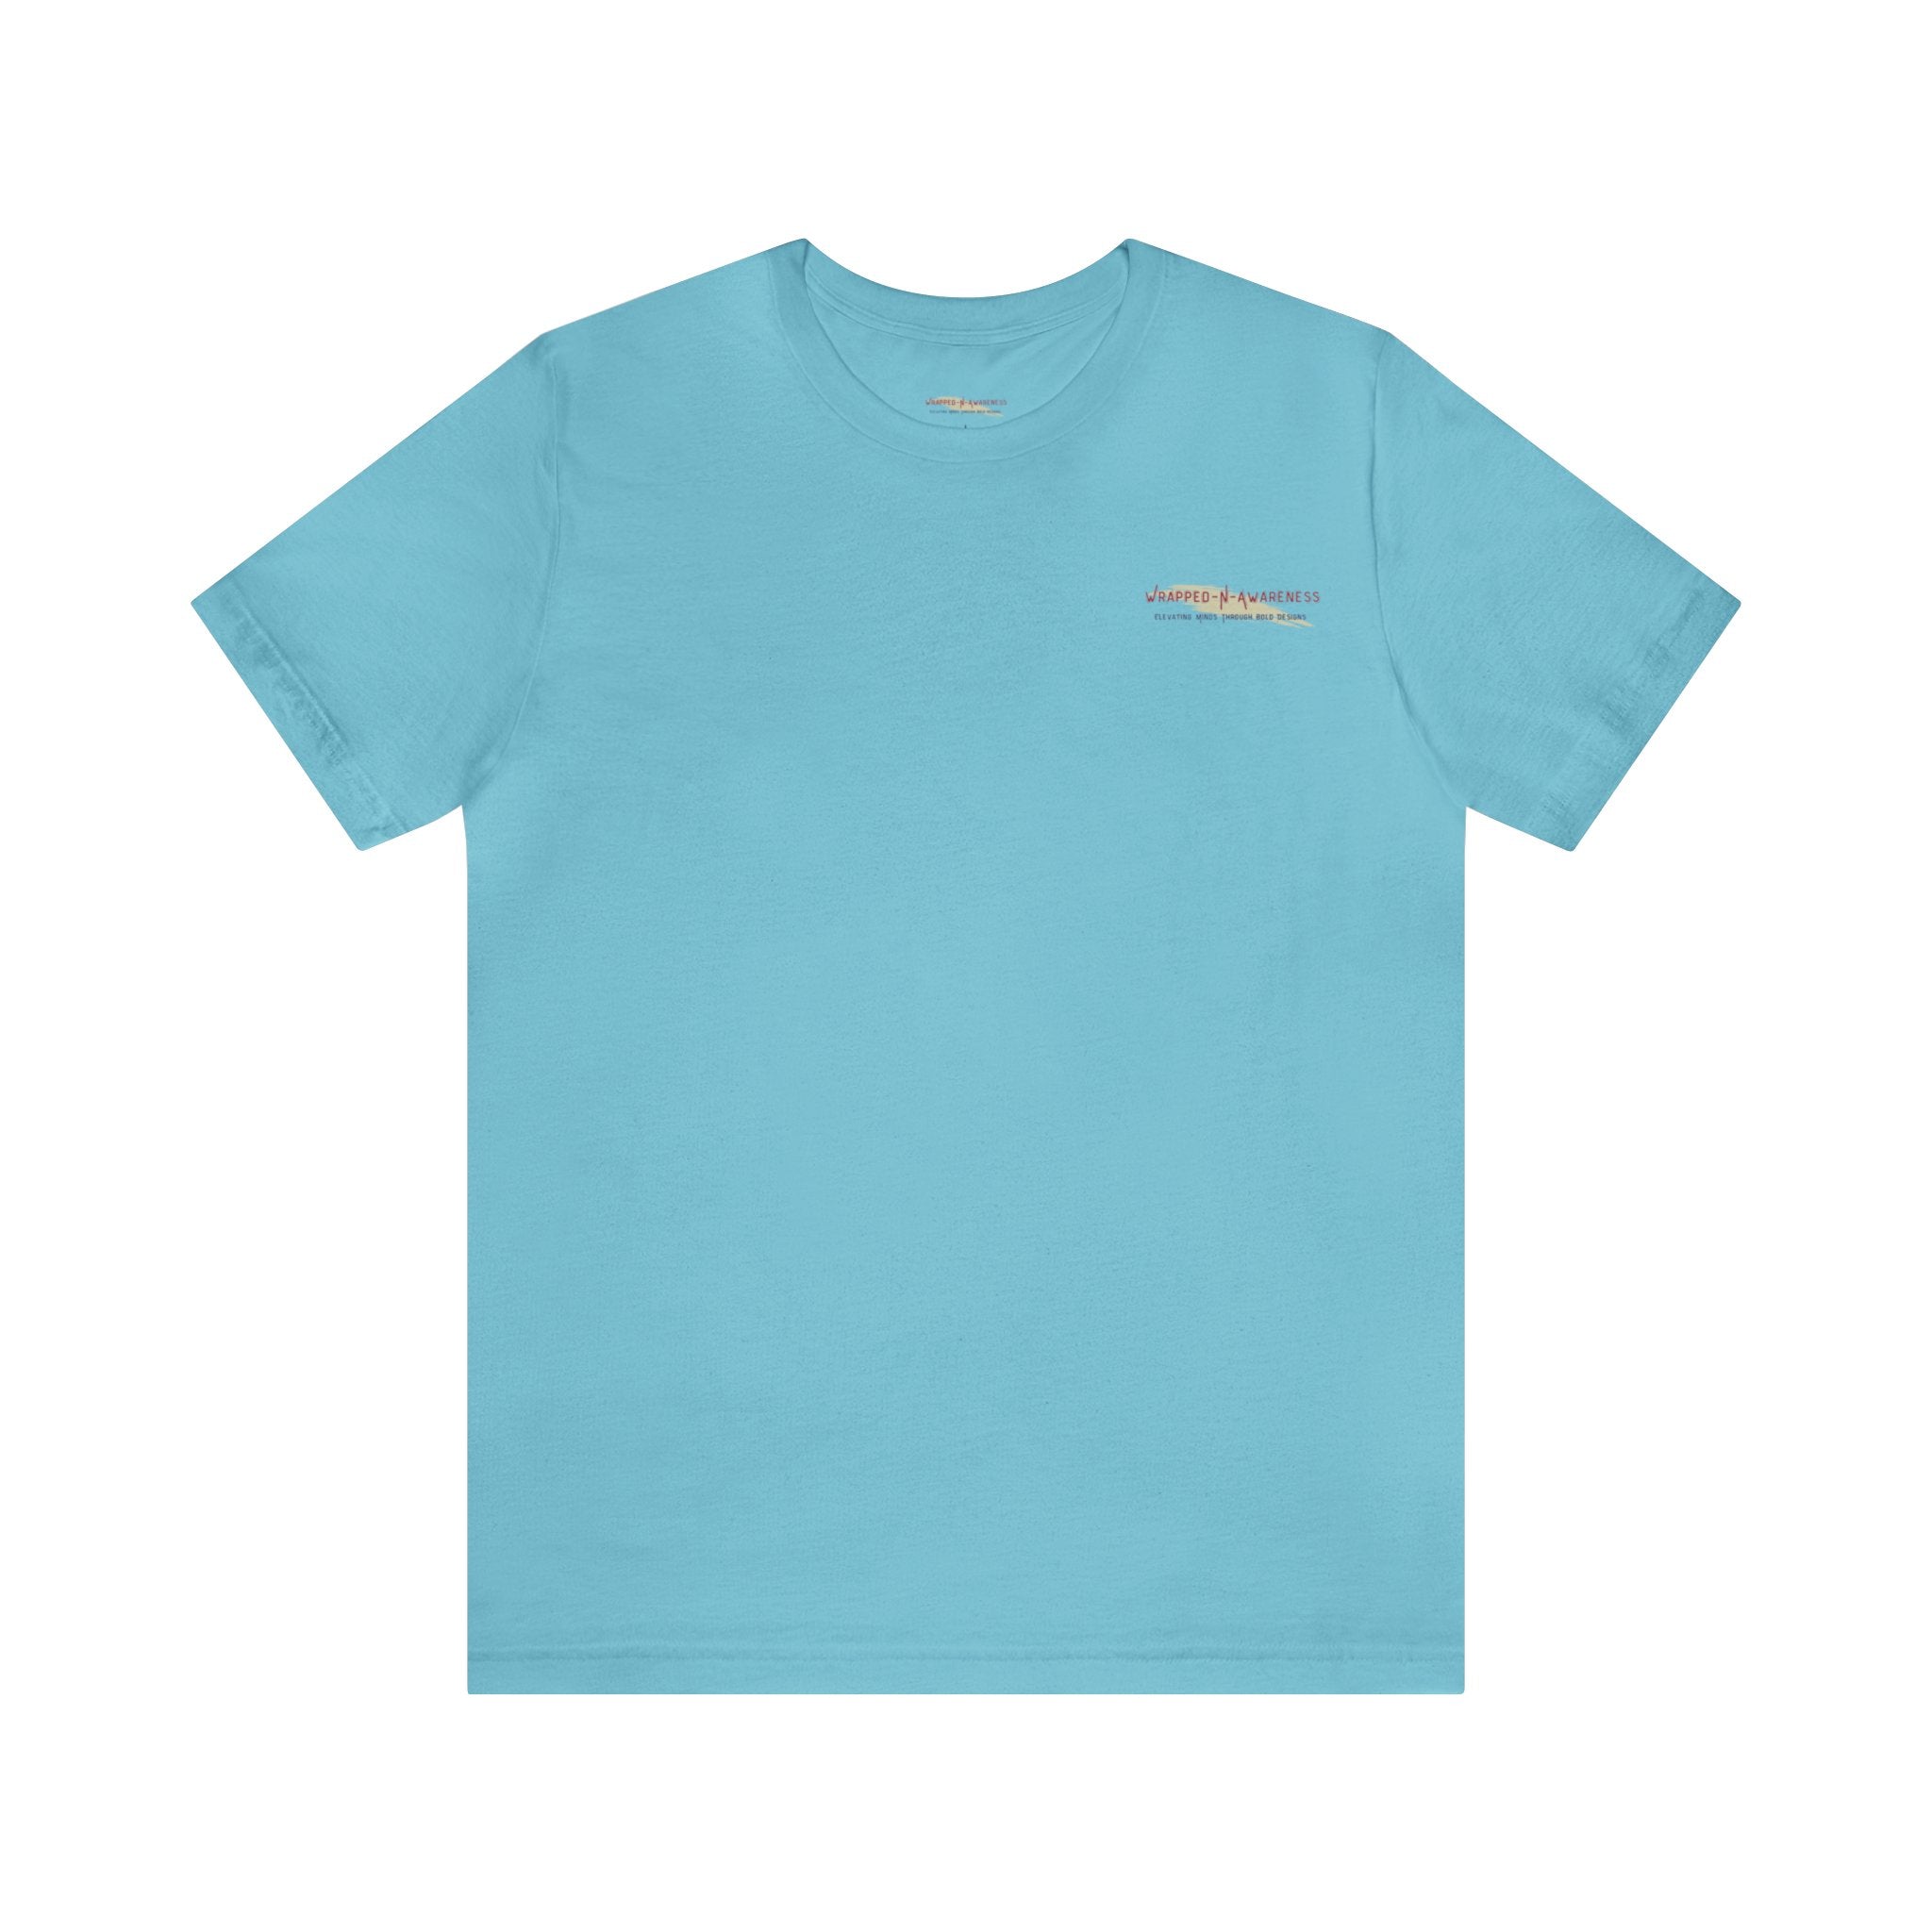 Inspire Growth Jersey Tee - Bella+Canvas 3001 Turquoise Airlume Cotton Bella+Canvas 3001 Crew Neckline Jersey Short Sleeve Lightweight Fabric Mental Health Support Retail Fit Tear-away Label Tee Unisex Tee T-Shirt 13876588137824257727_2048 Printify